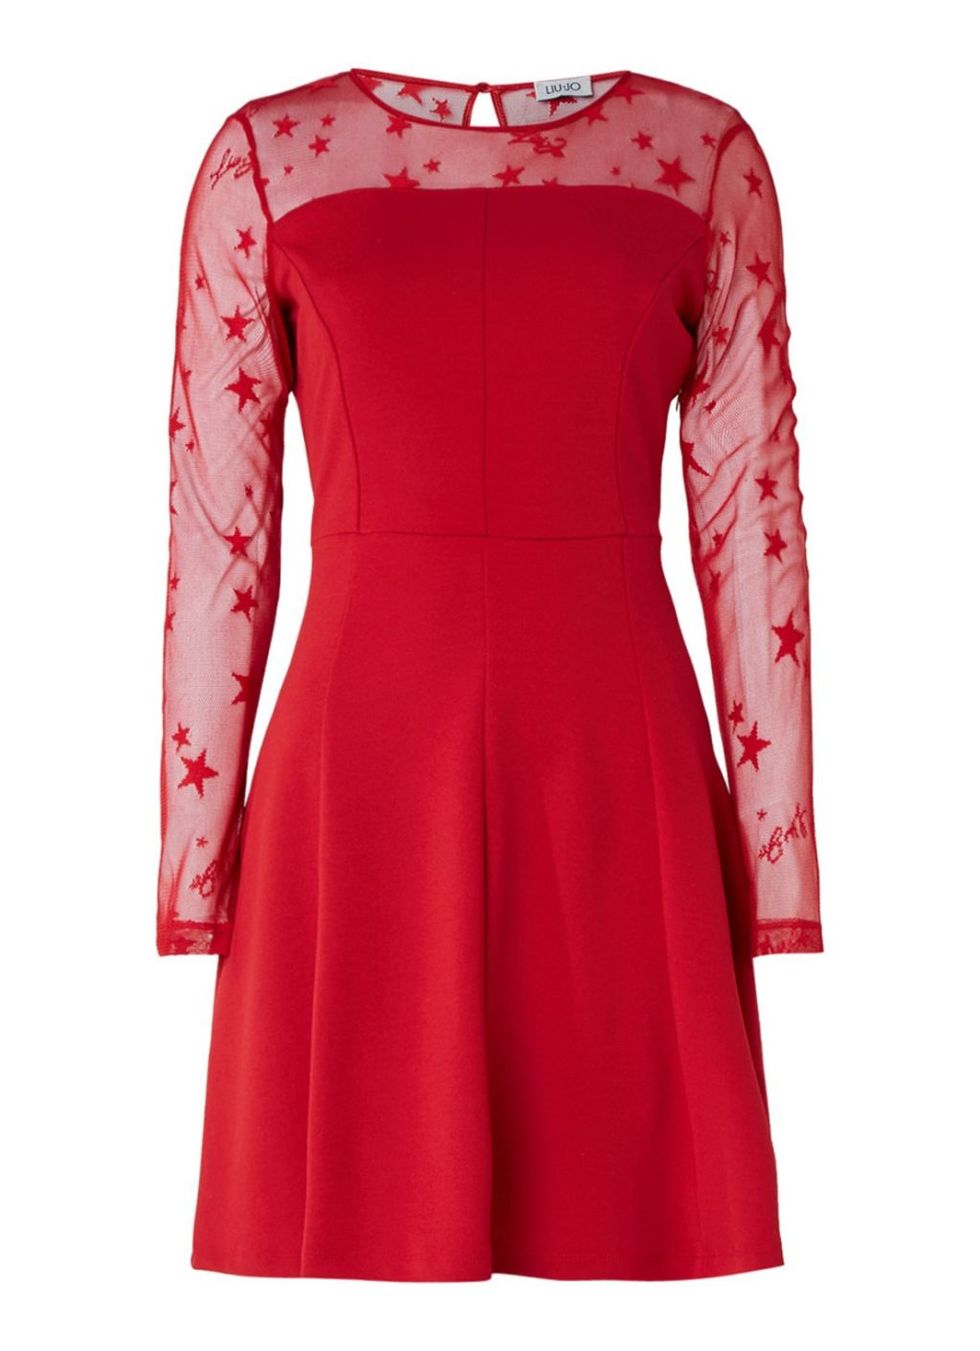 Clothing, Dress, Red, Sleeve, Day dress, Cocktail dress, Neck, A-line, Outerwear, Sheath dress, 